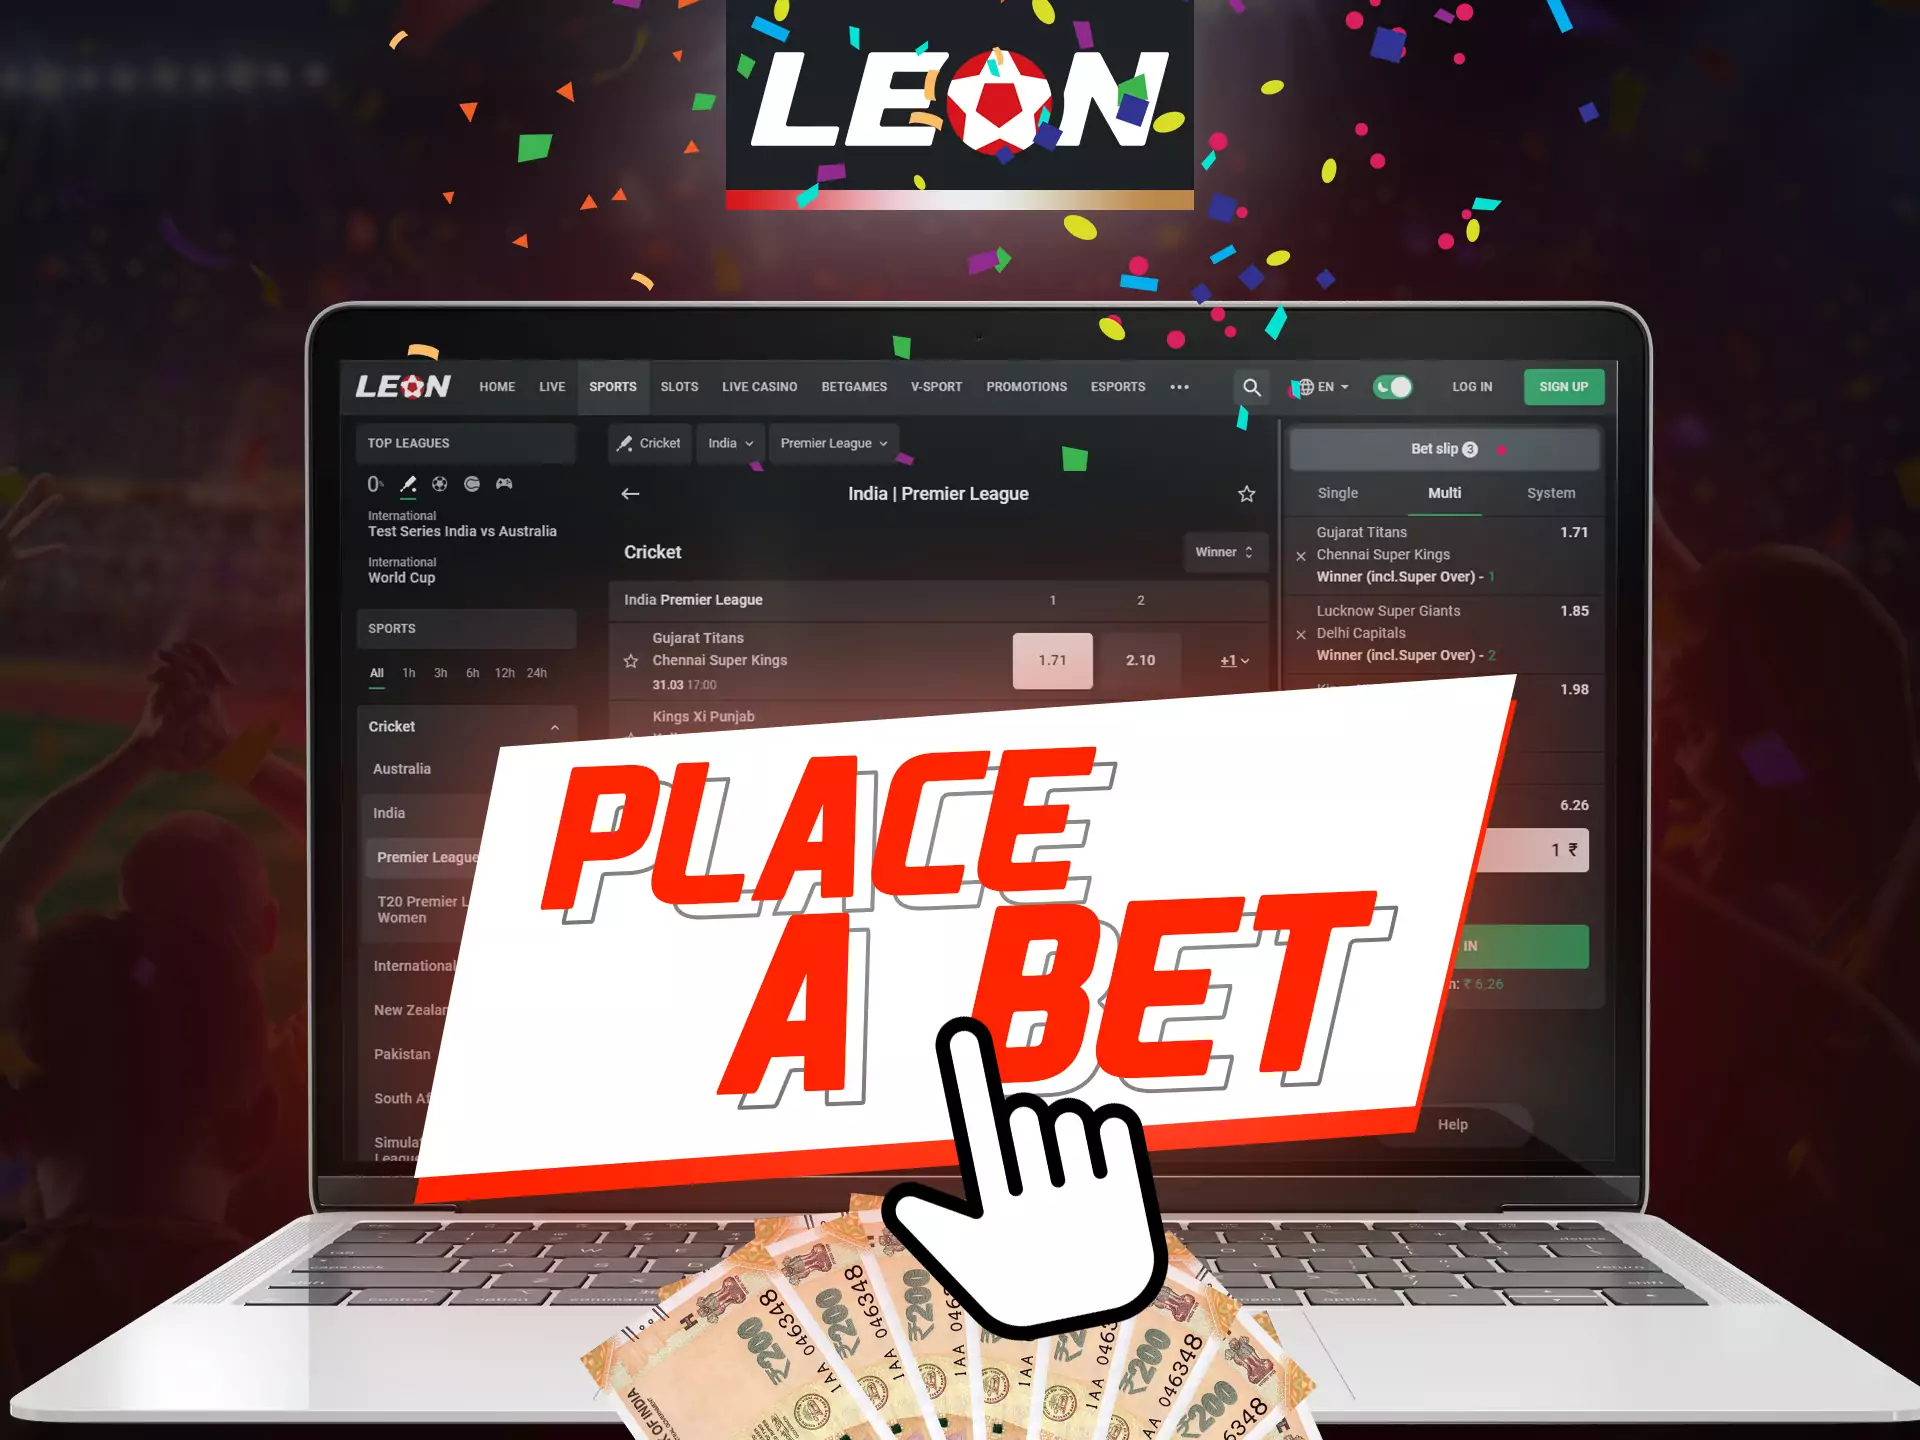 With these instructions, betting on Leonbet is easy and straightforward.